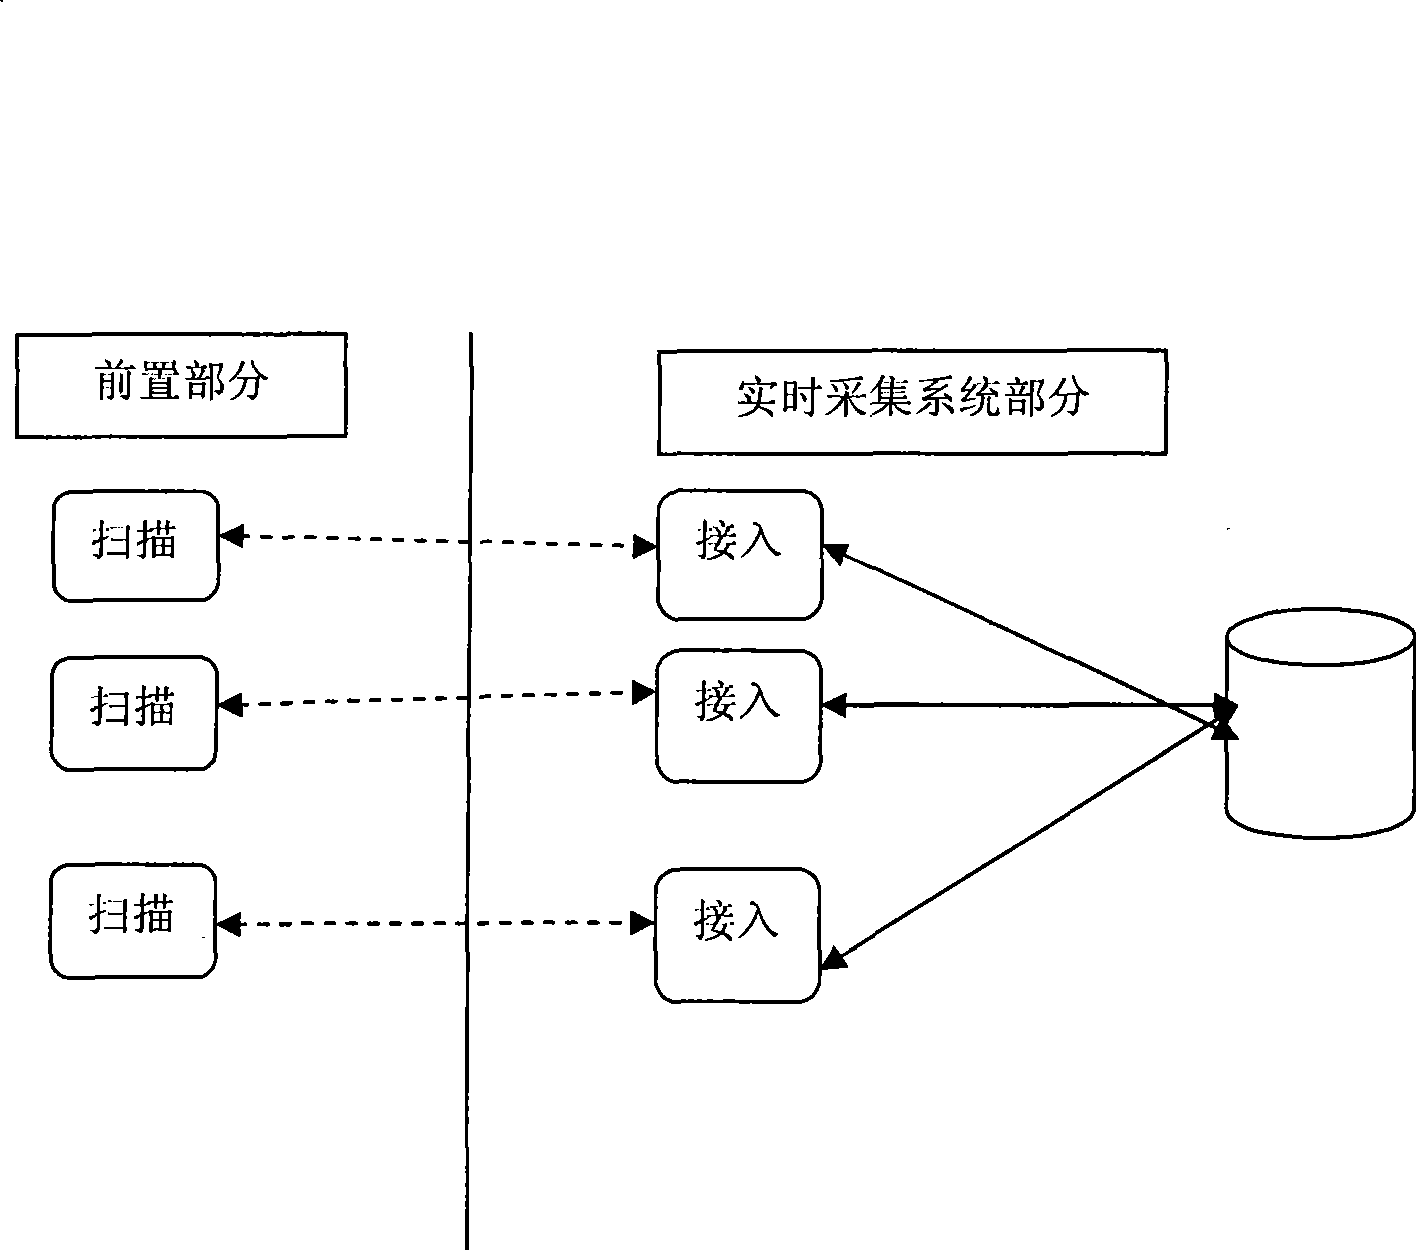 Preposed redundancy structure of collection system with convenient protocol extension, and method thereof